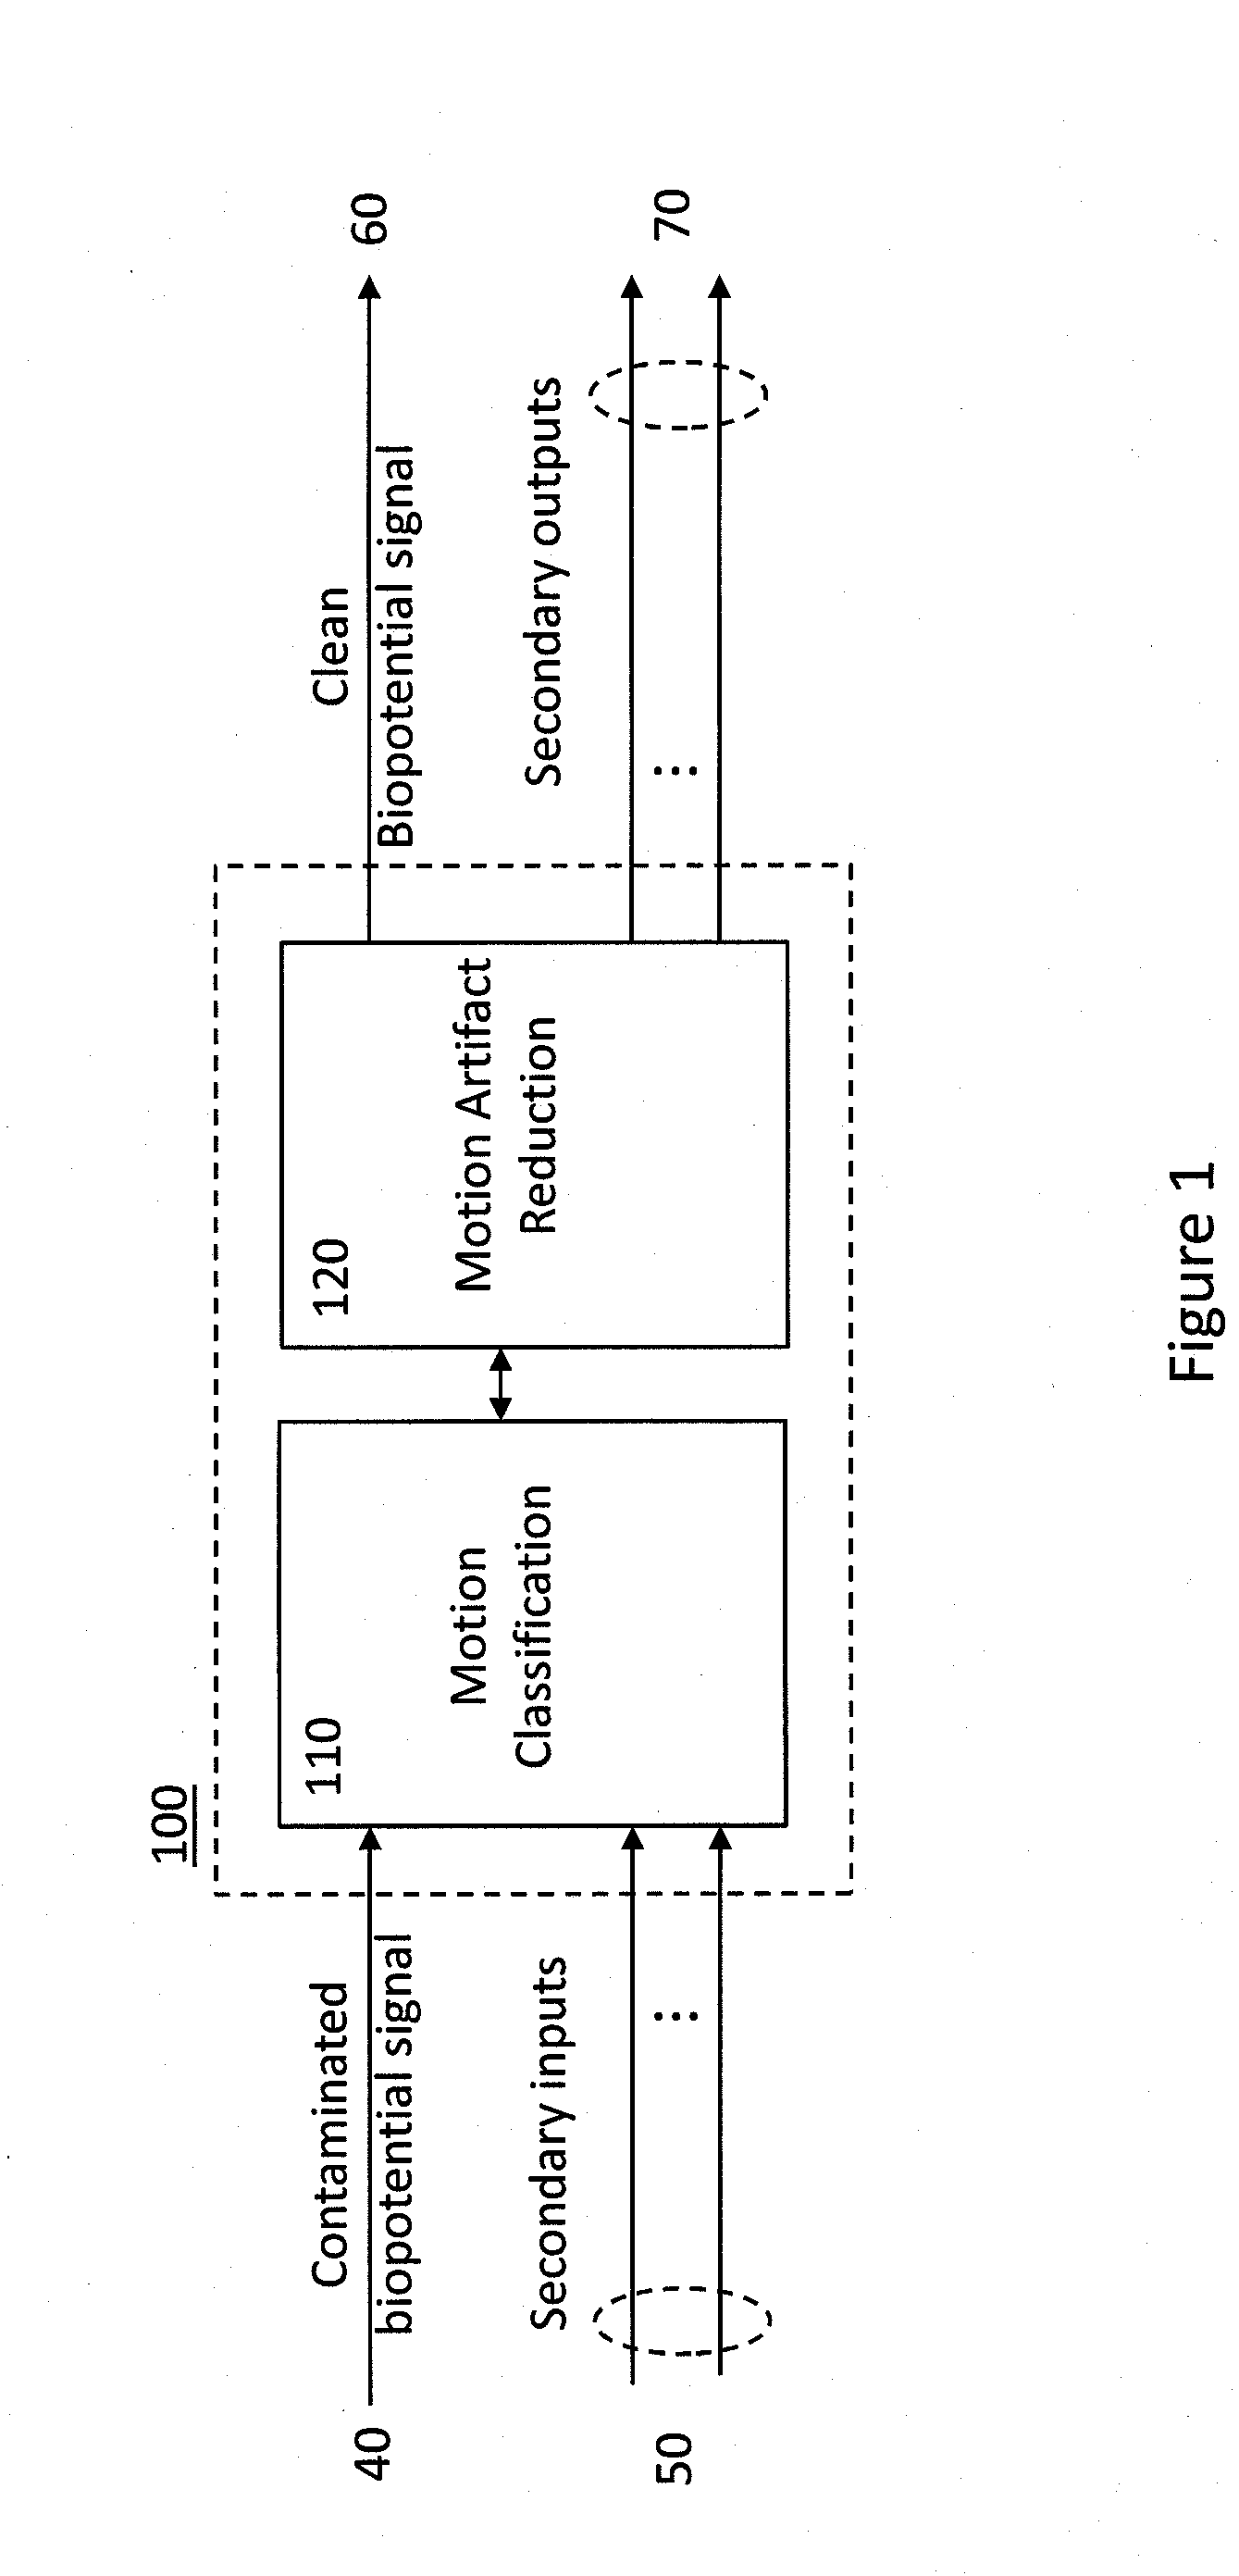 System and method for the analysis of biopotential signals using motion artifact removal techniques